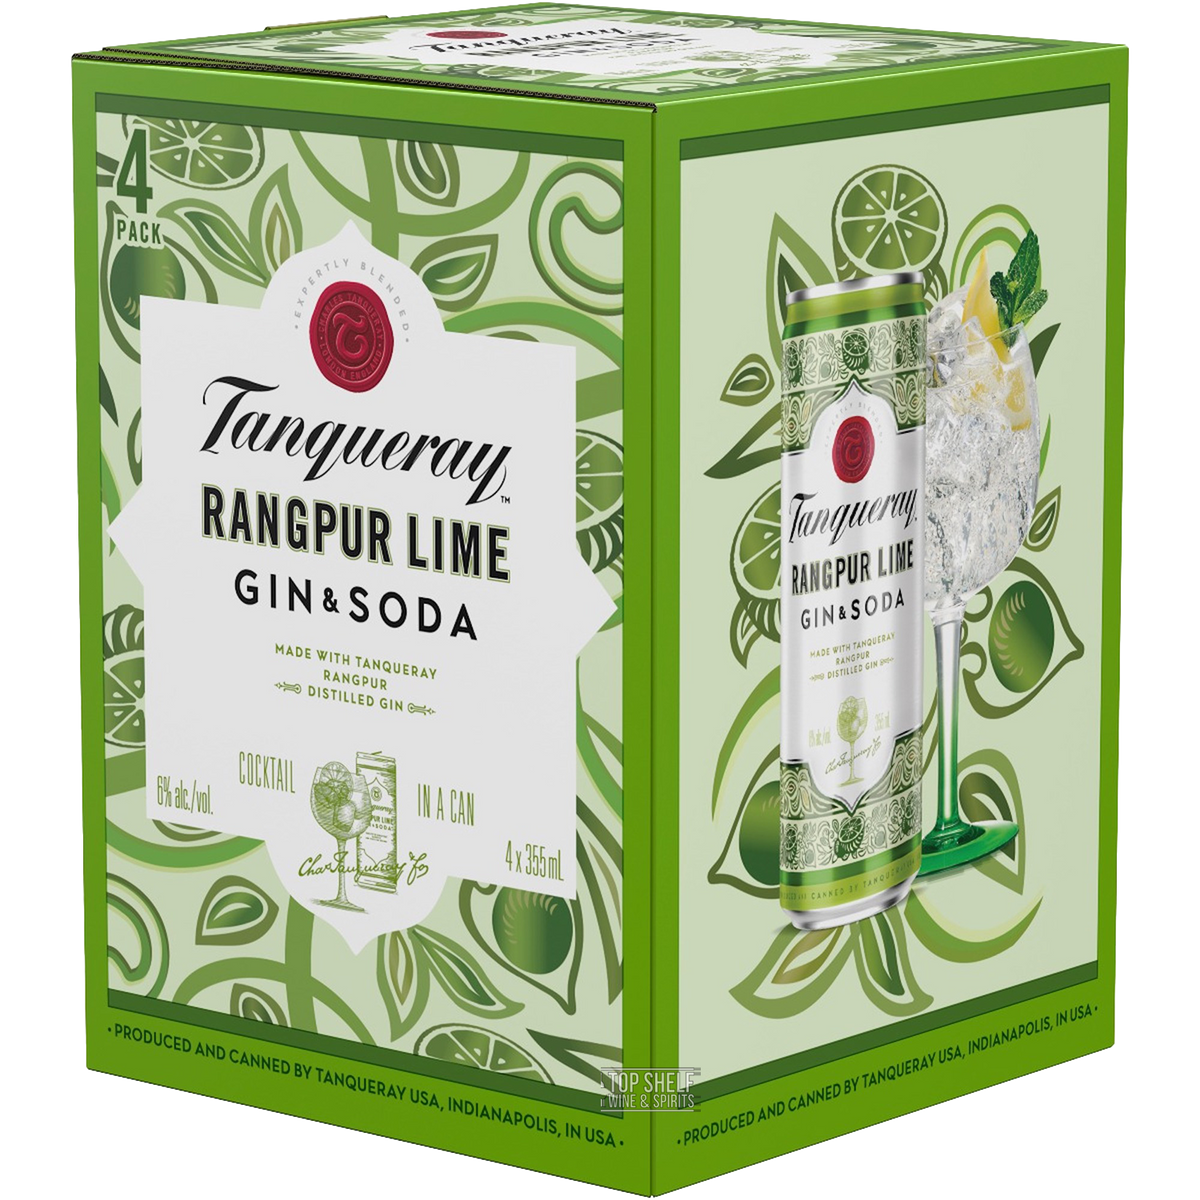 Tanqueray Rangpur Lime Gin & Soda 4 pack Cans